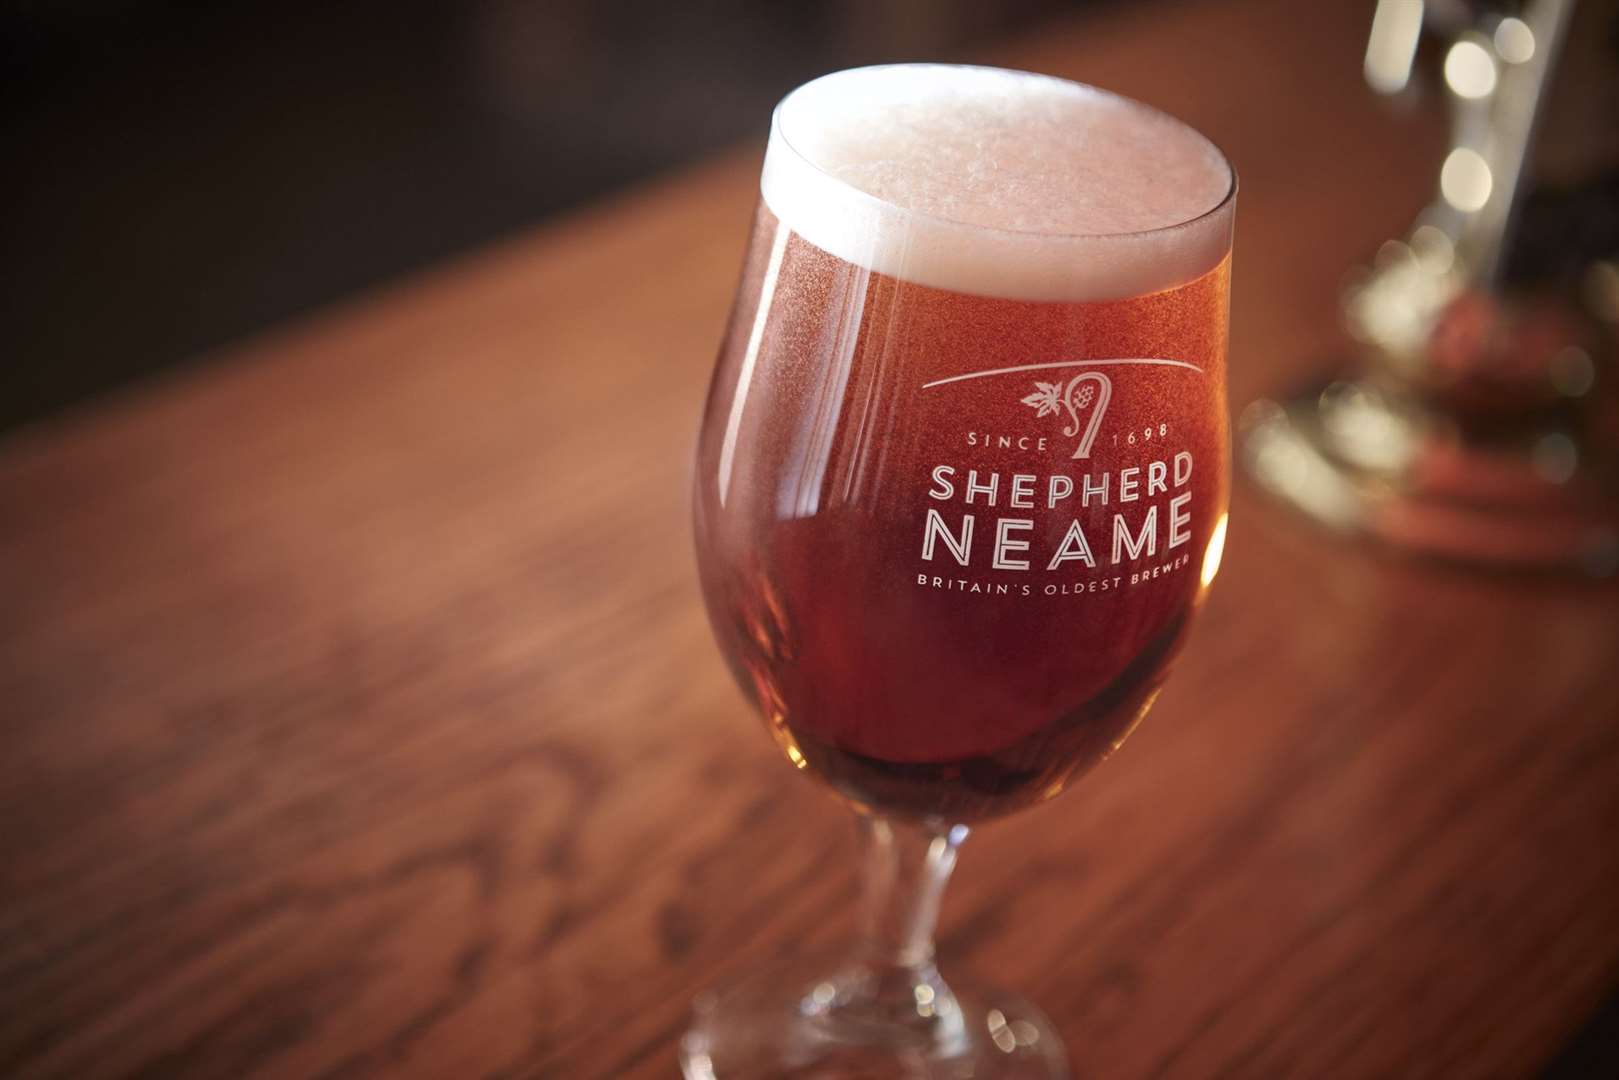 Camra has recognised Shepherd Neame for its commitment to quality brews